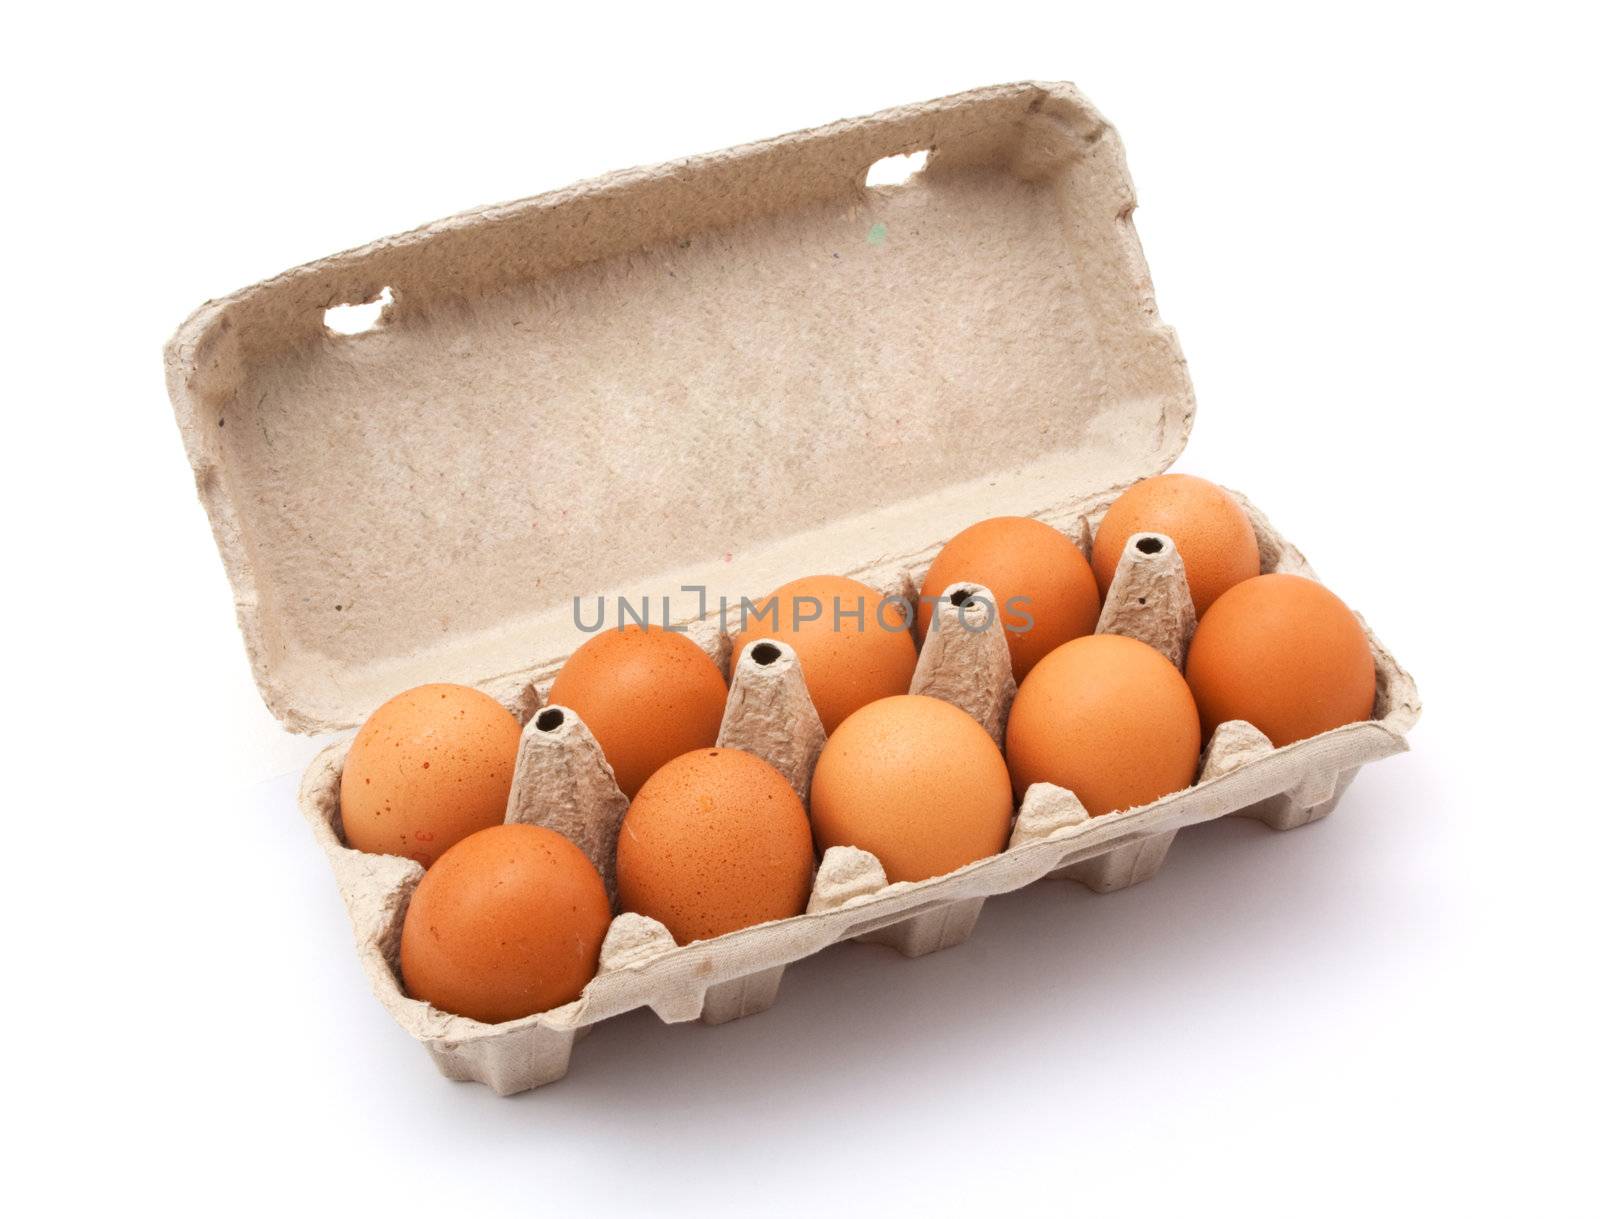 chicken eggs in the package name on a white background